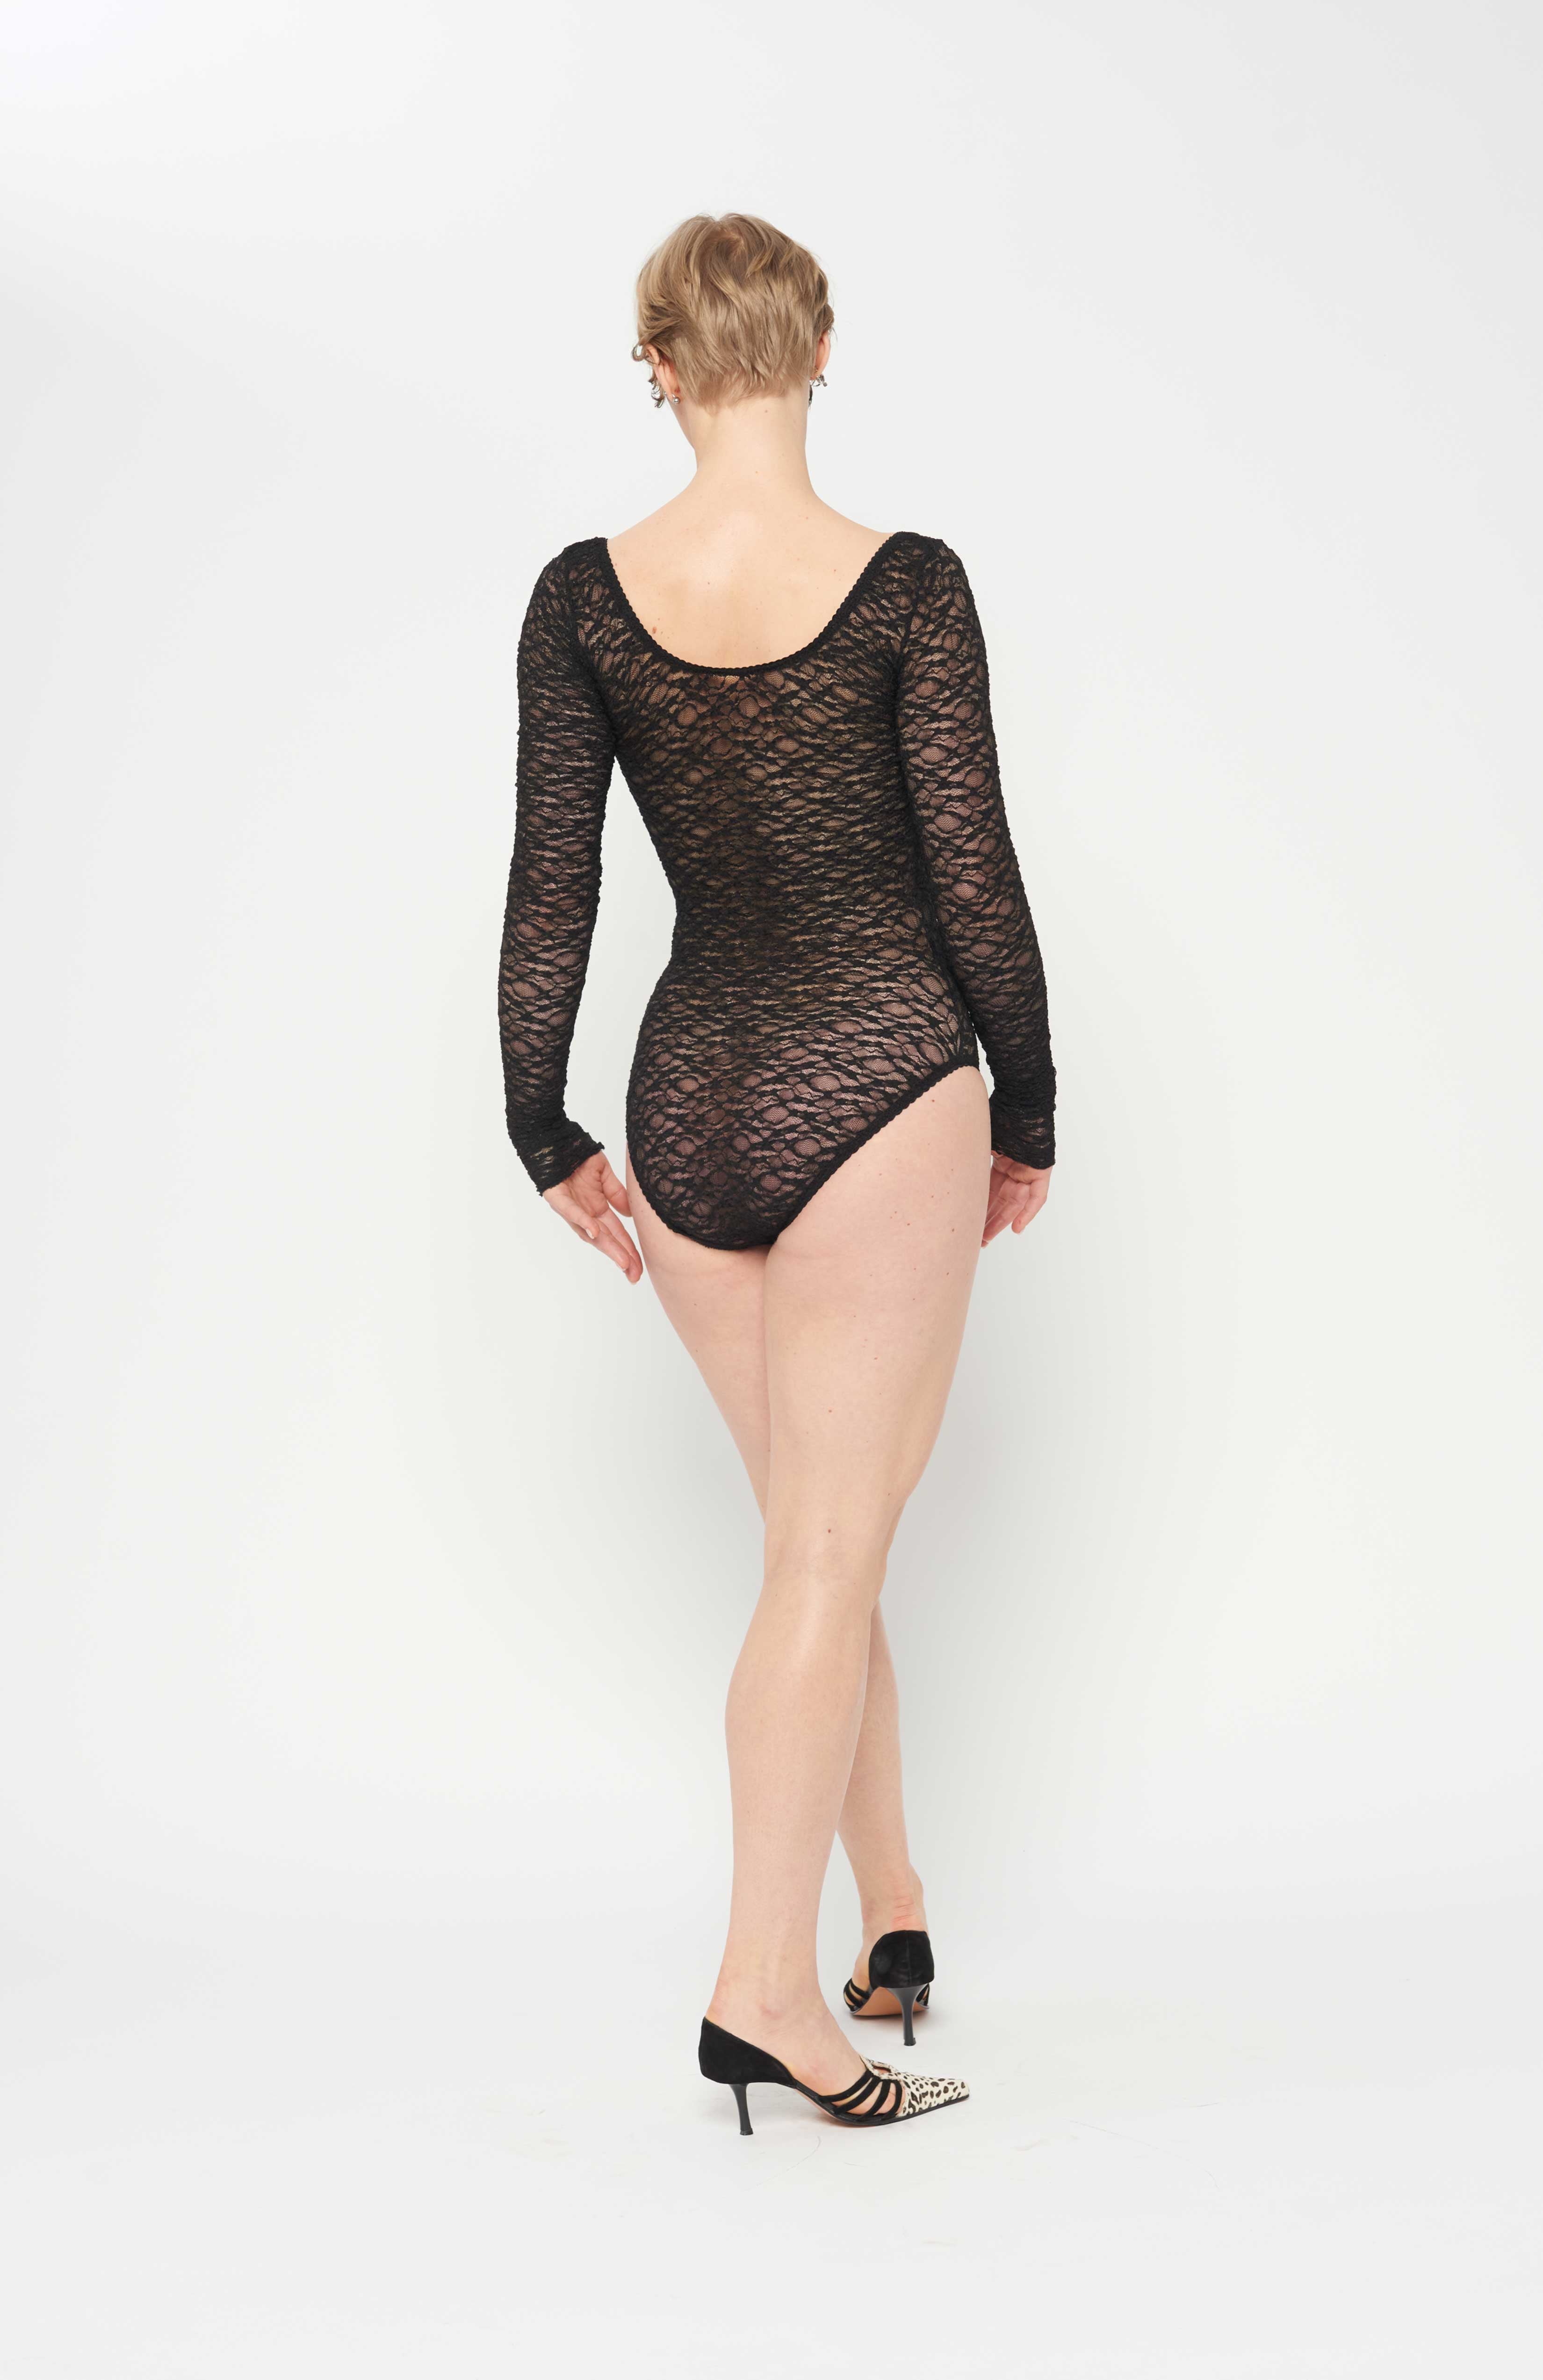 maroske peech A reprise of our signature stretch soft cup leotard in stunning black lace. Features a snap opening at gusset for ease wearer and zig-zag decorative stitching with a scalloped elastic detail.